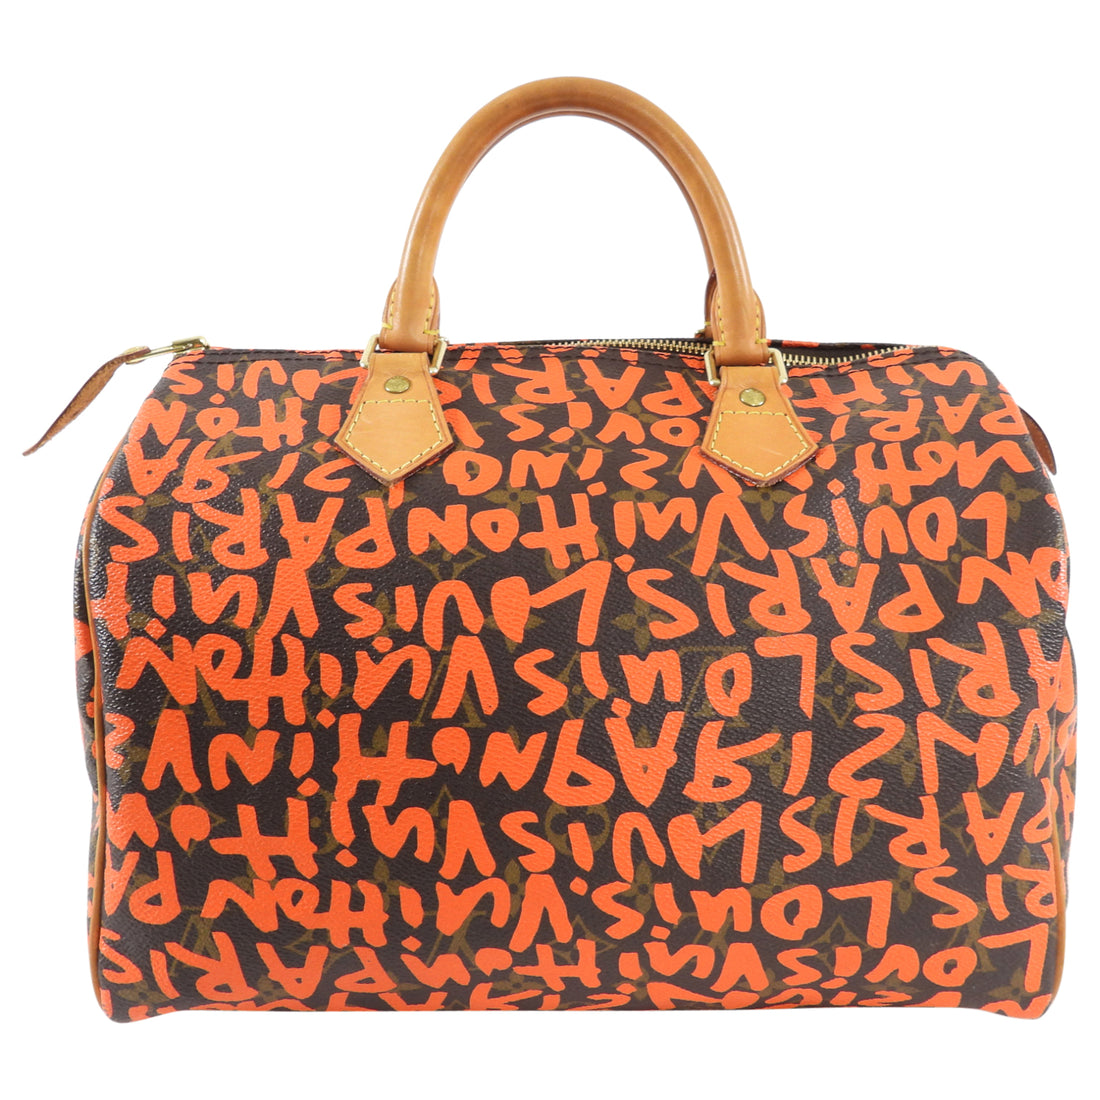 Louis Vuitton Stephen Sprouse Graffiti Limited Edition Speedy 30 Bag – I  MISS YOU VINTAGE